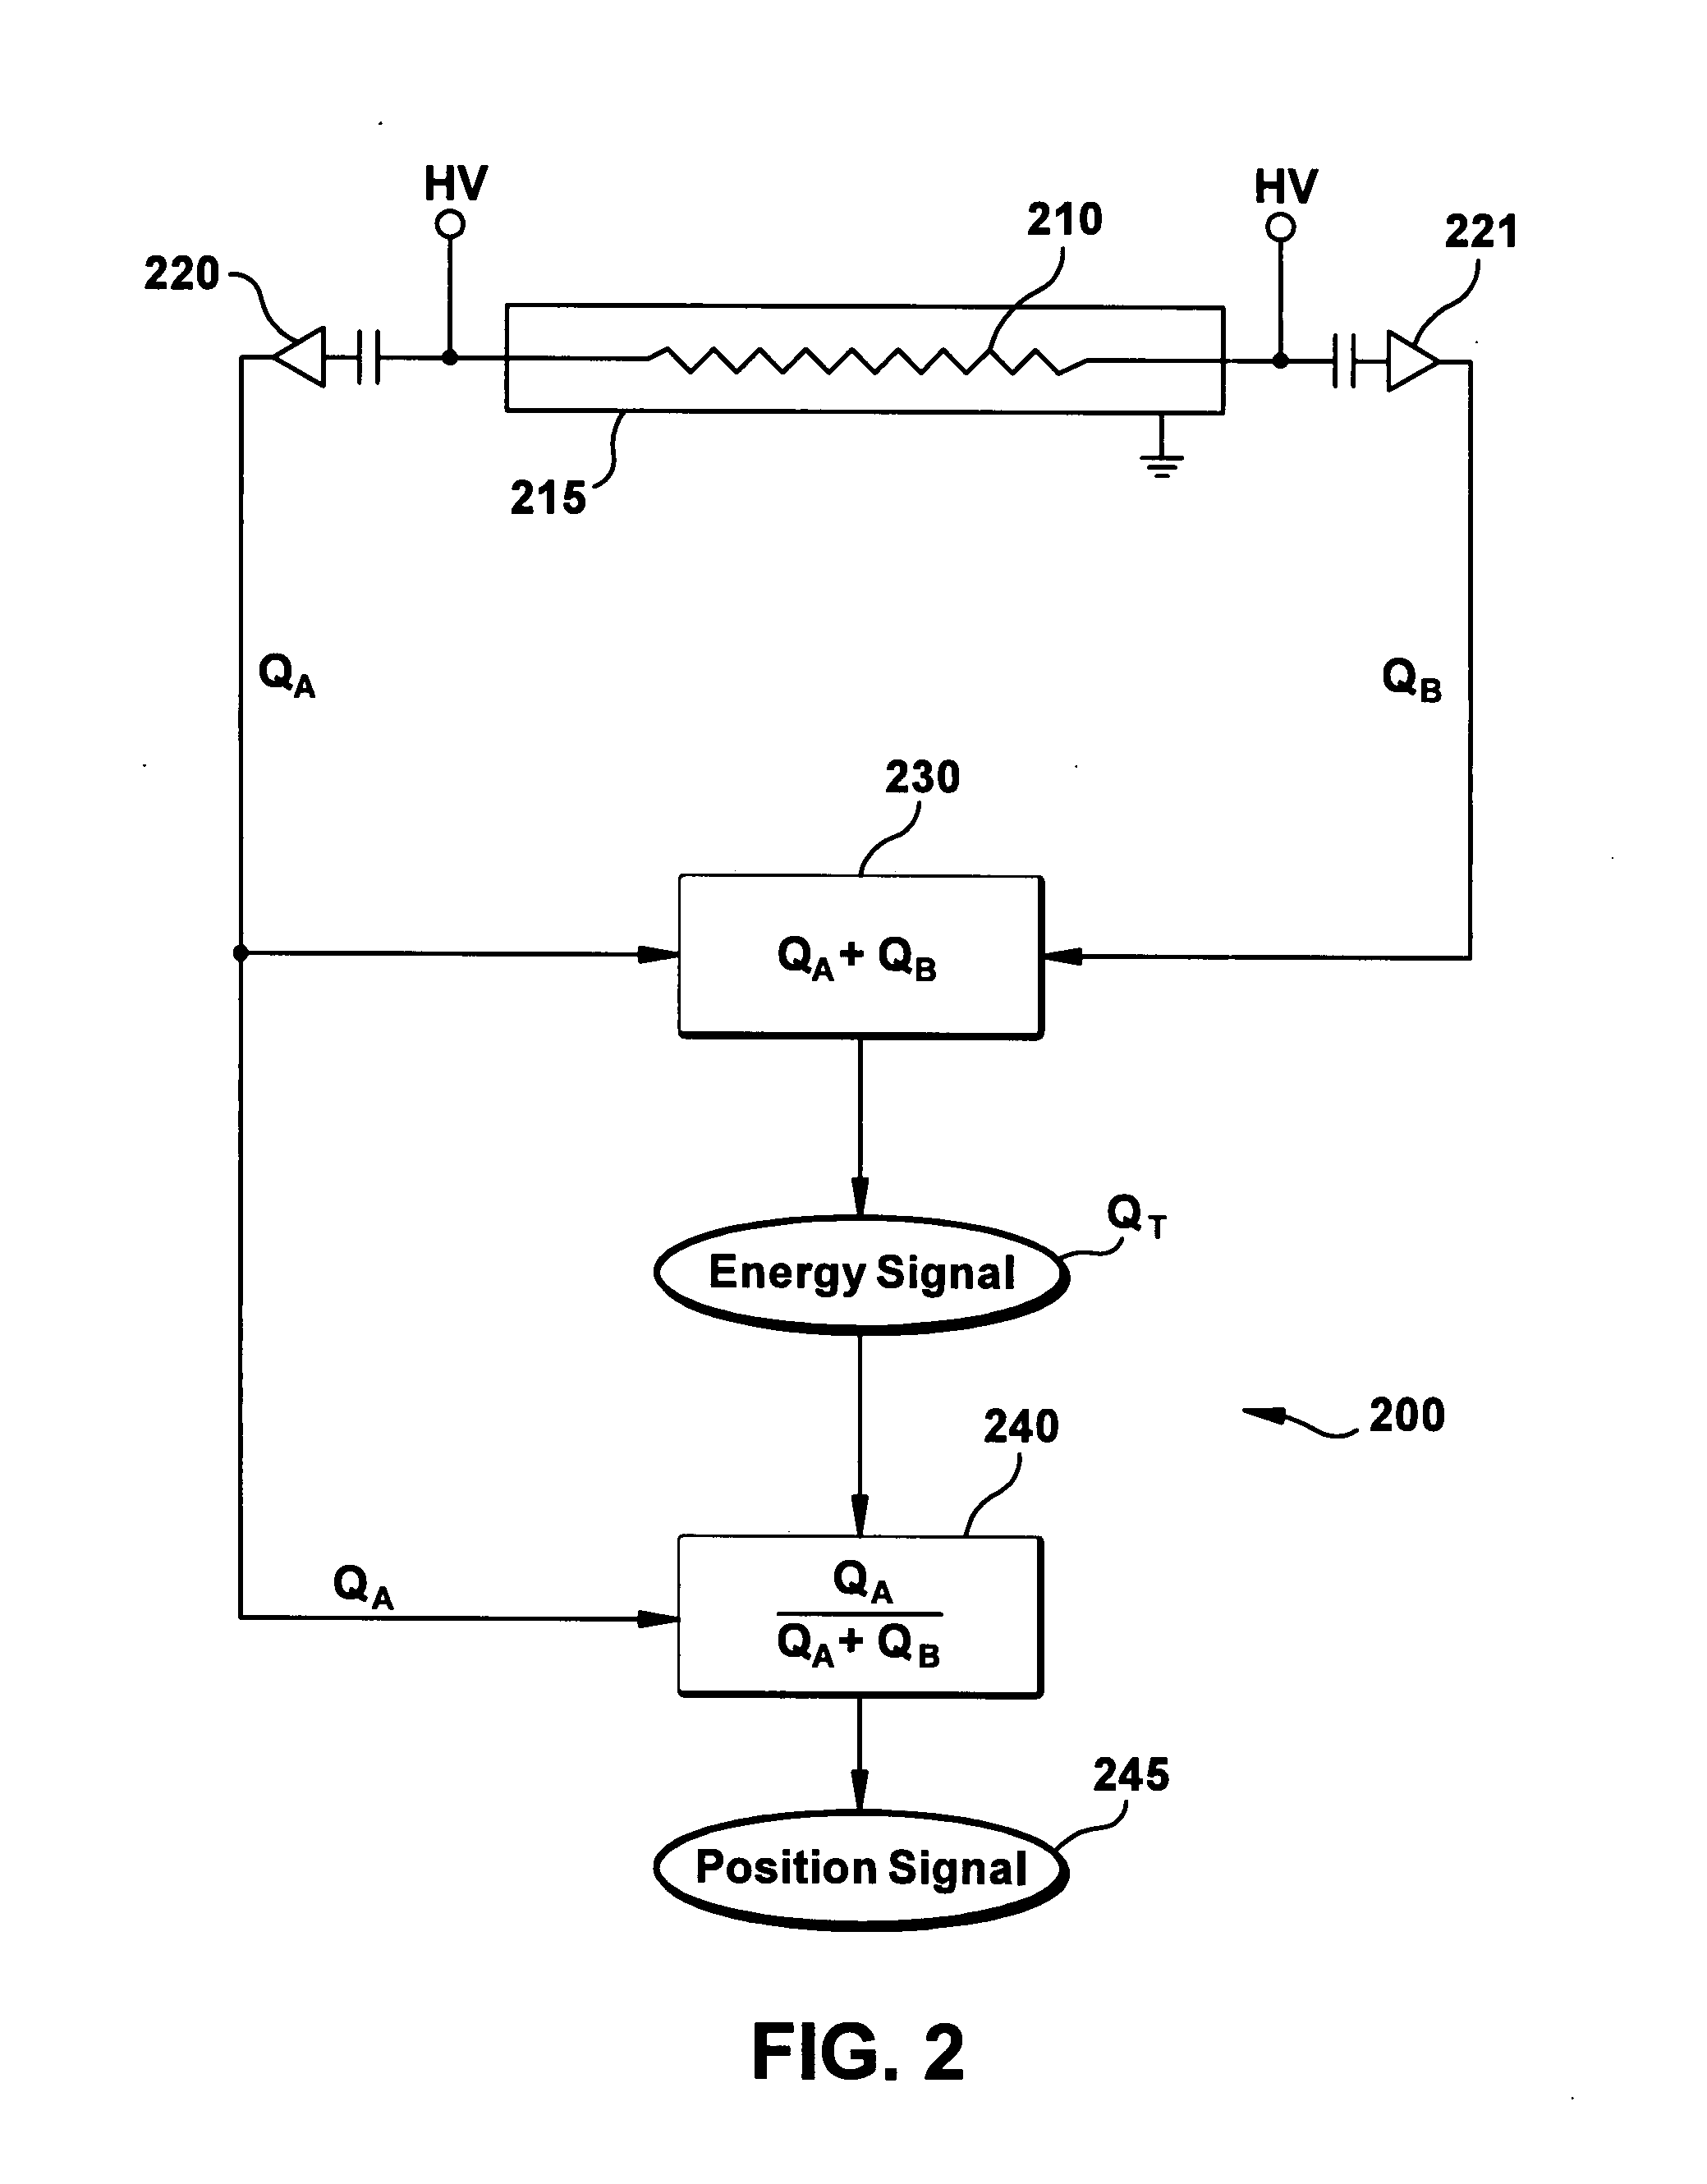 Radiation detector employing amorphous material